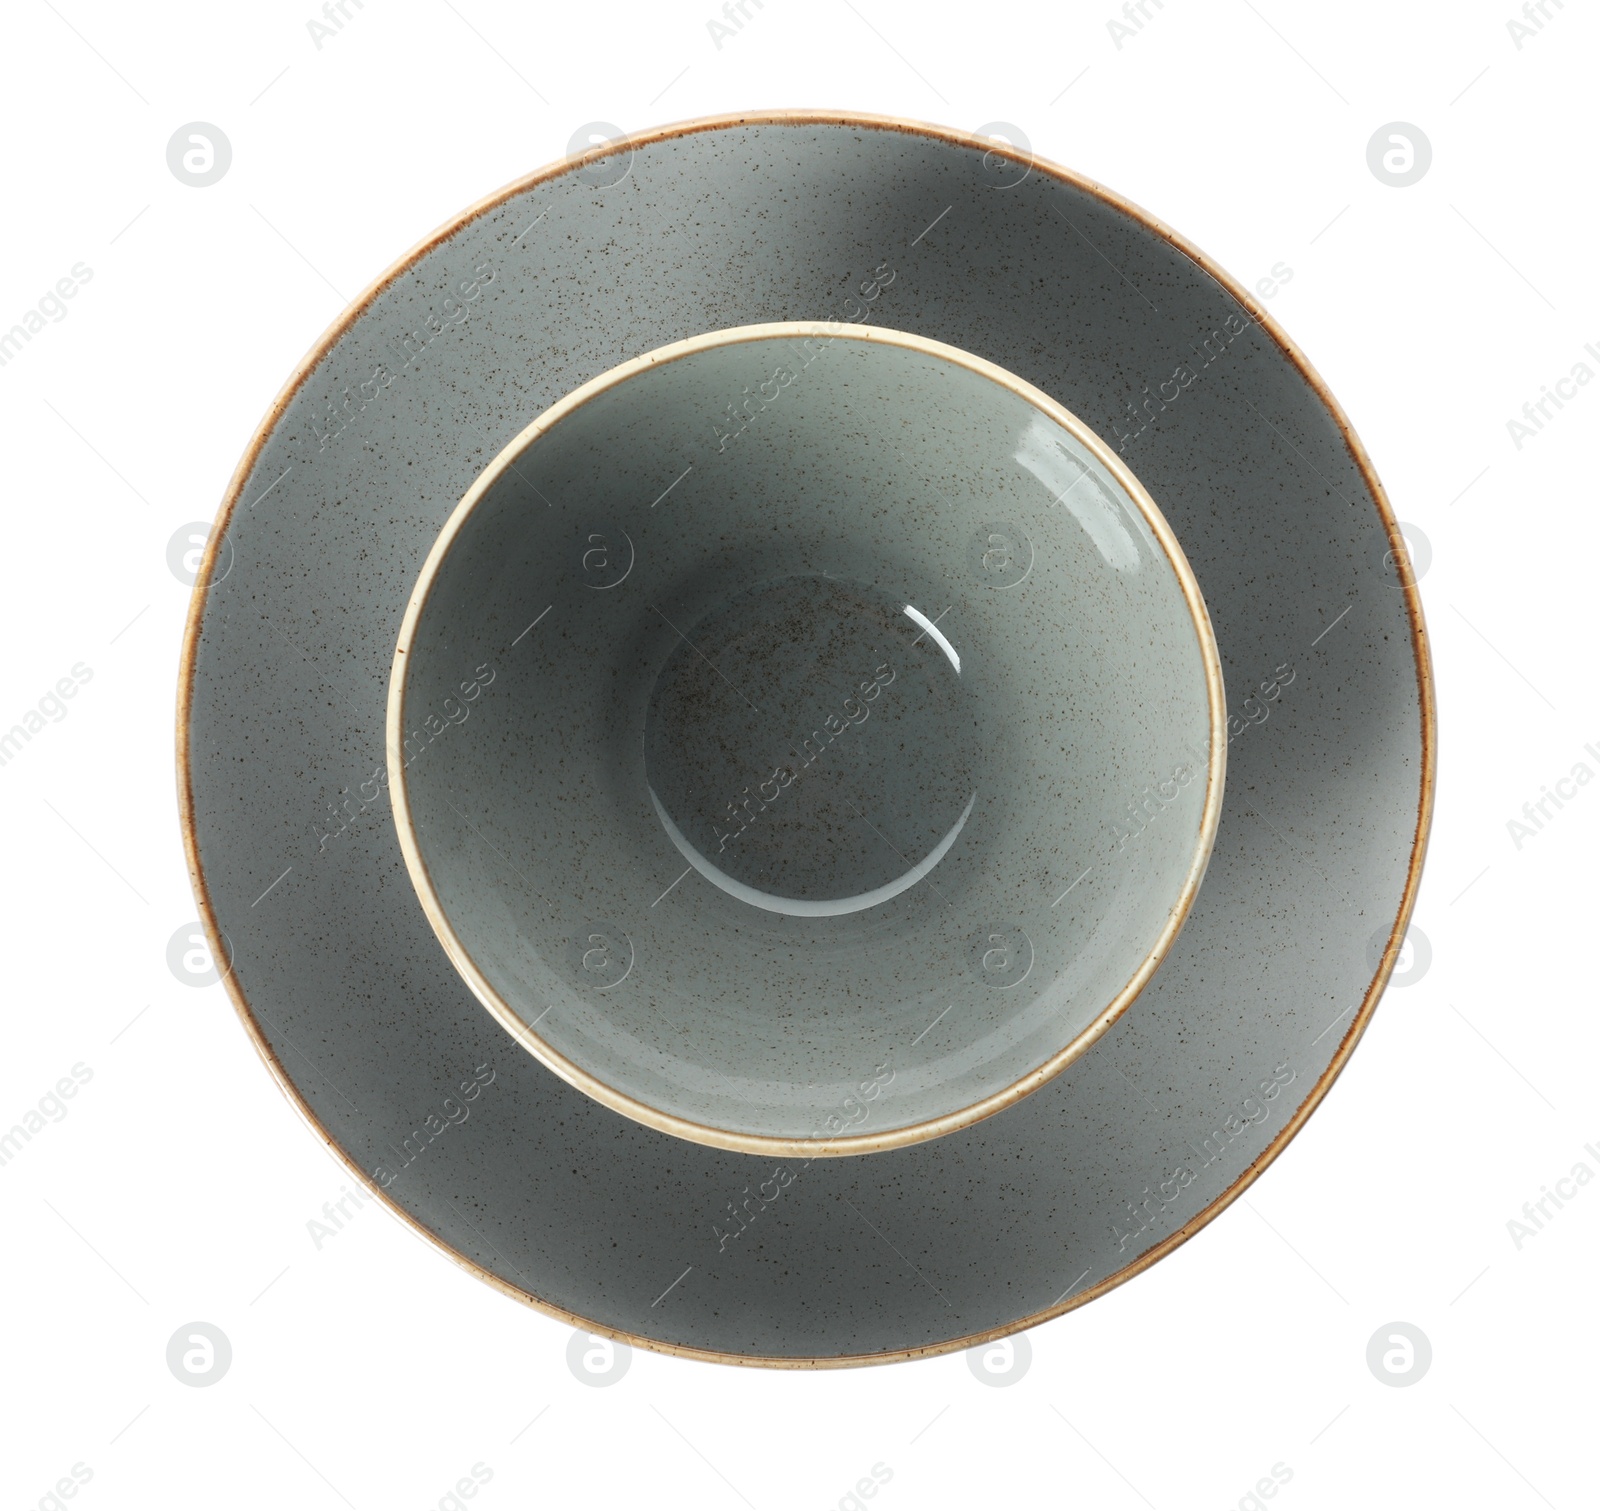 Photo of New grey ceramic plate and bowl on white background, top view